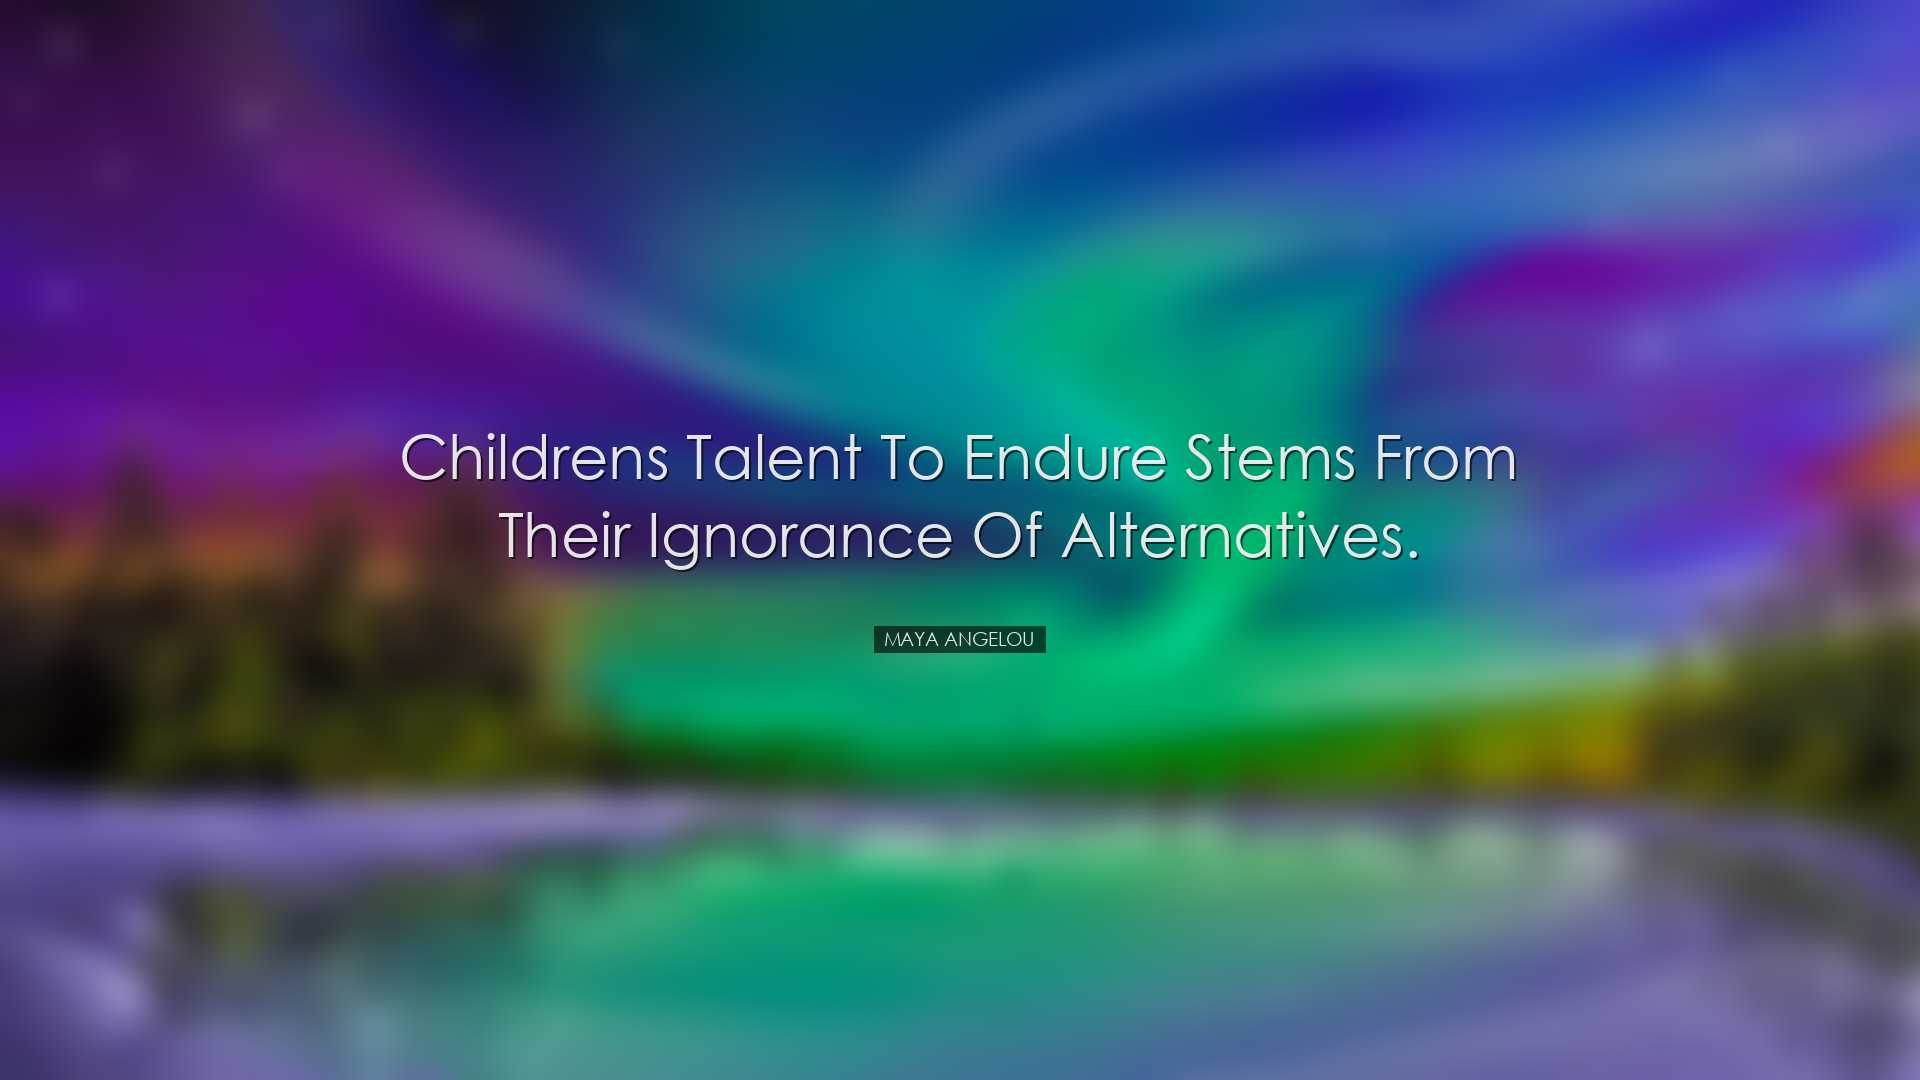 Childrens talent to endure stems from their ignorance of alternati